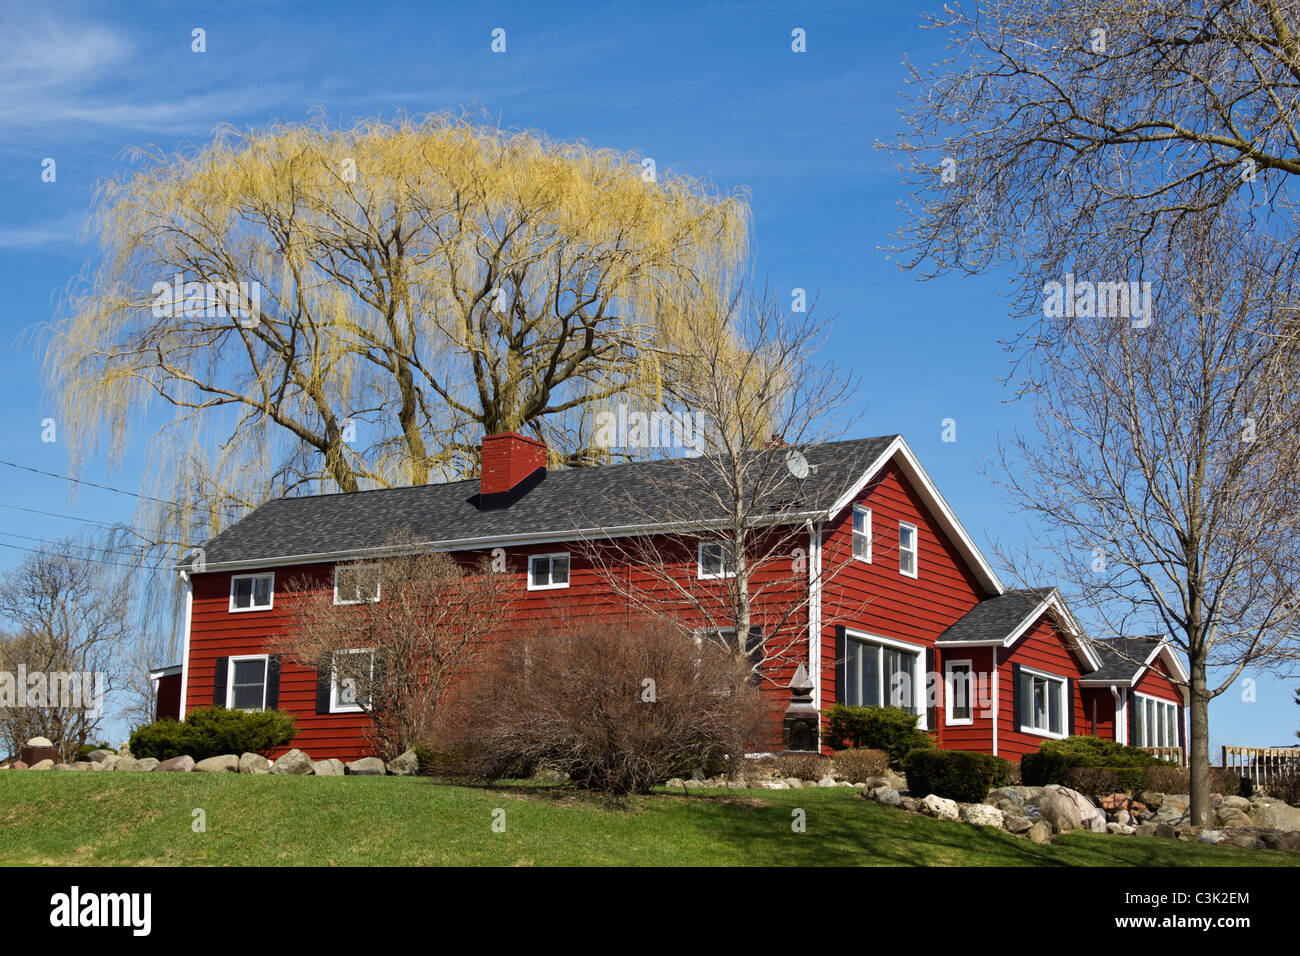 Colorful Midwest House Stock Photo